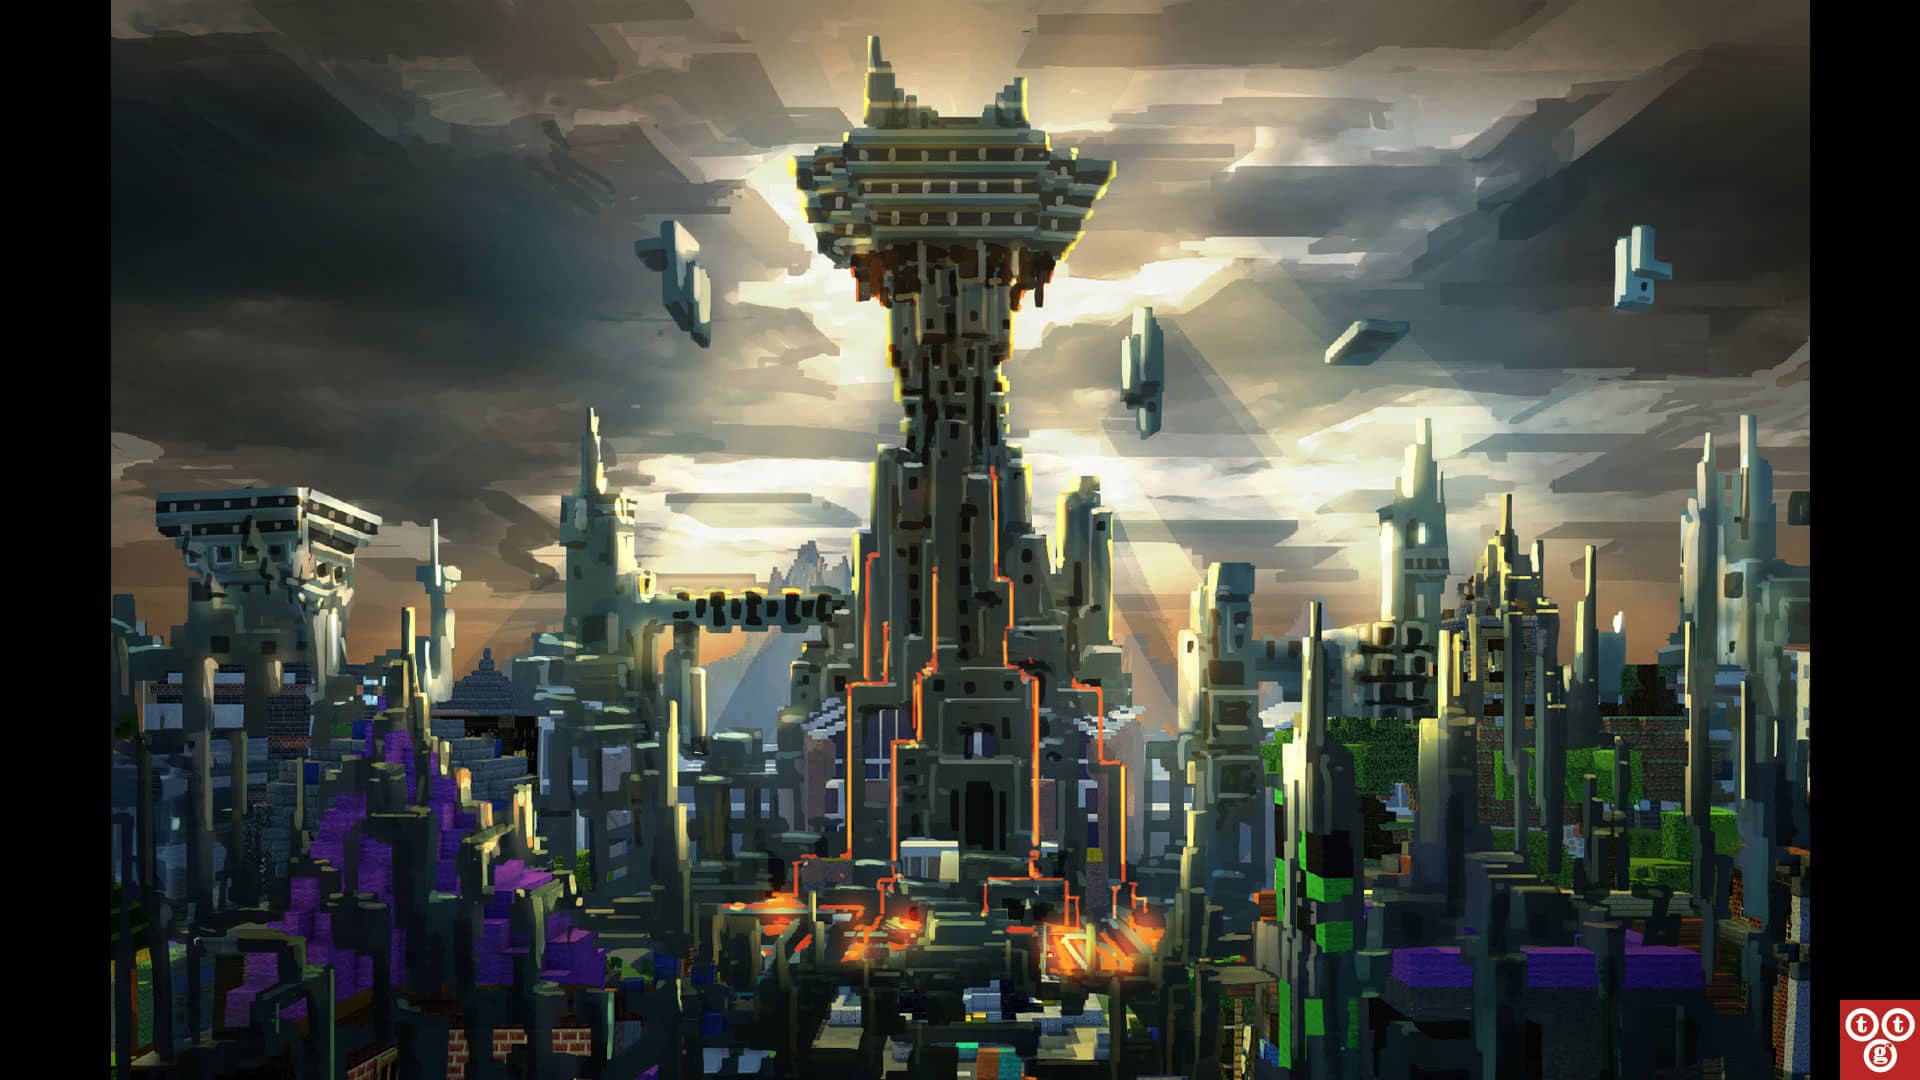 What is the title of this picture ? Image - Twisted-tower-concept-minecraft-concept-art.jpg | Minecraft